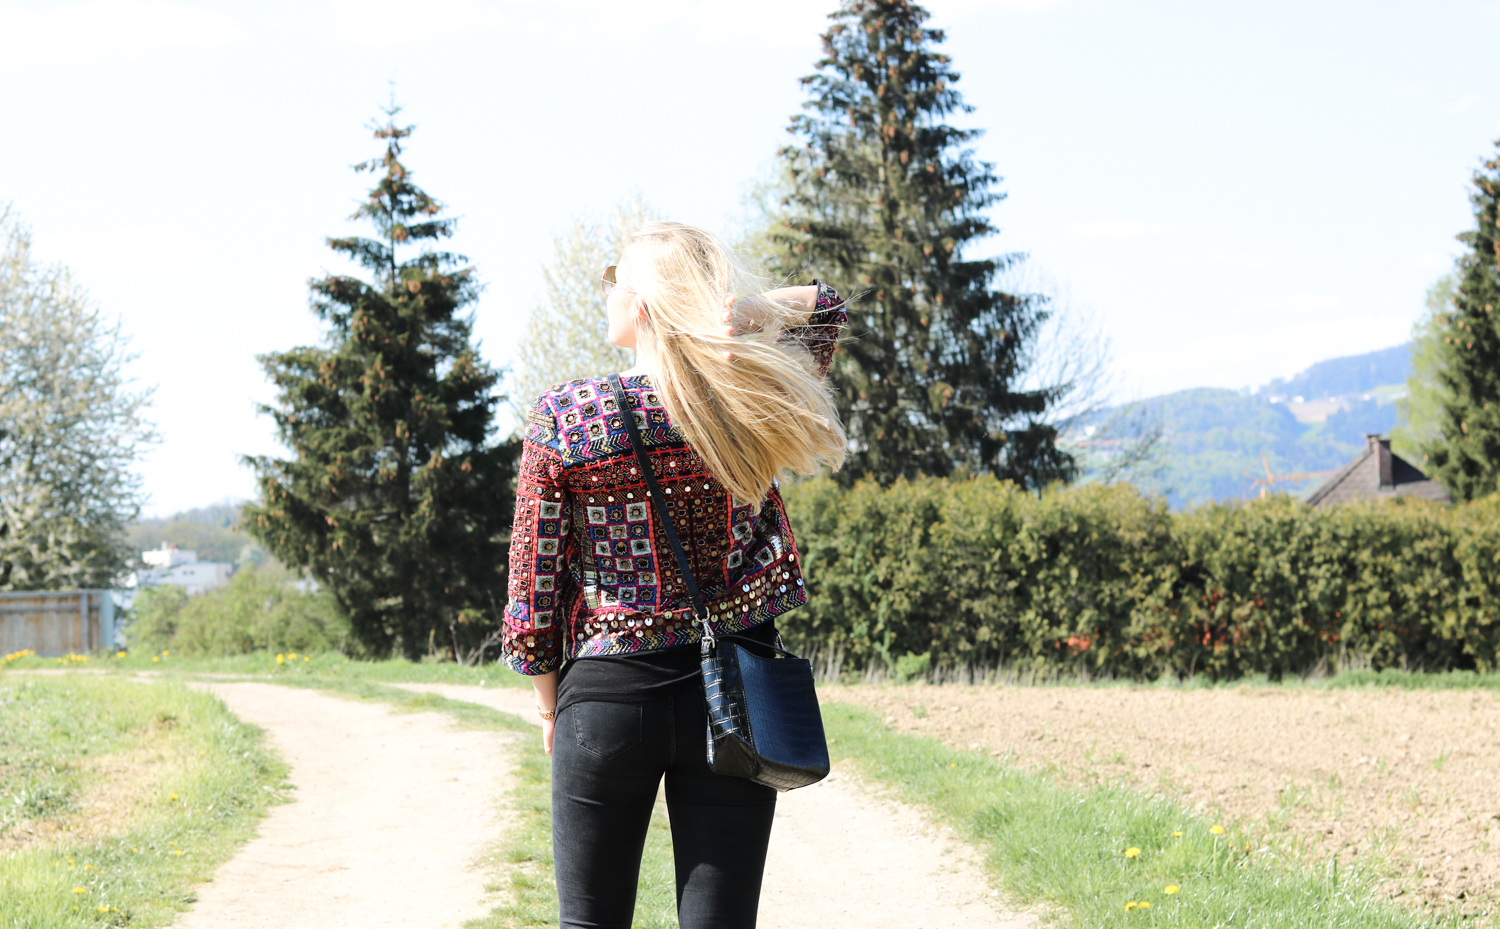 Bits and Bobs by Eva, Blog, Austrian Blog, Österreichische Blog, lovedailydose, your daily treat, fashion, beauty, food, interior, fitness, new, bitsandbobsbyeva.com, travel, spring, April, Frühling, Folklore Jacke, Hippie, Festival Look, Outfit of the Day, Folklore Outfit